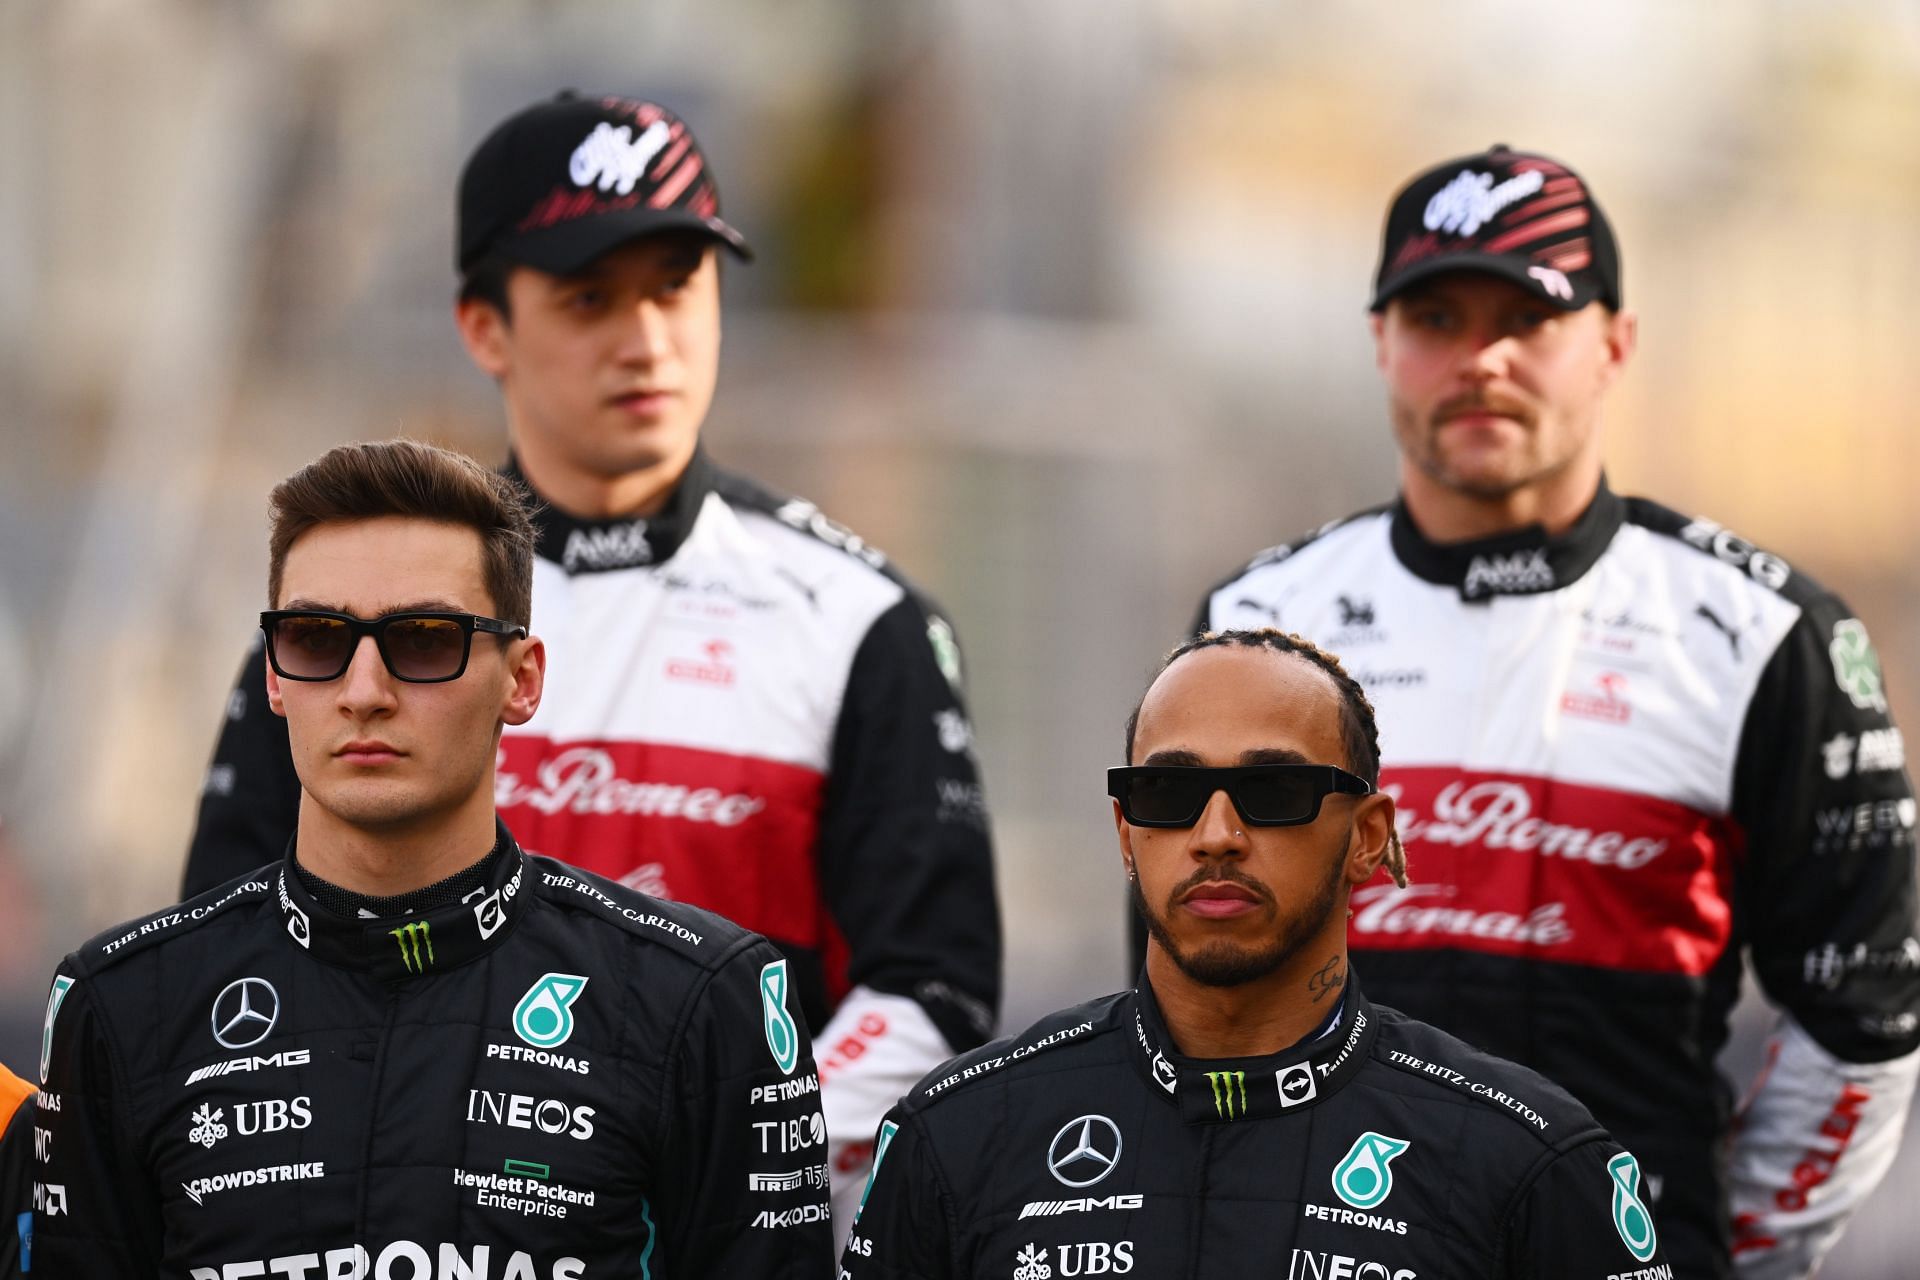 The battle of the Mercedes drivers is going to be interesting